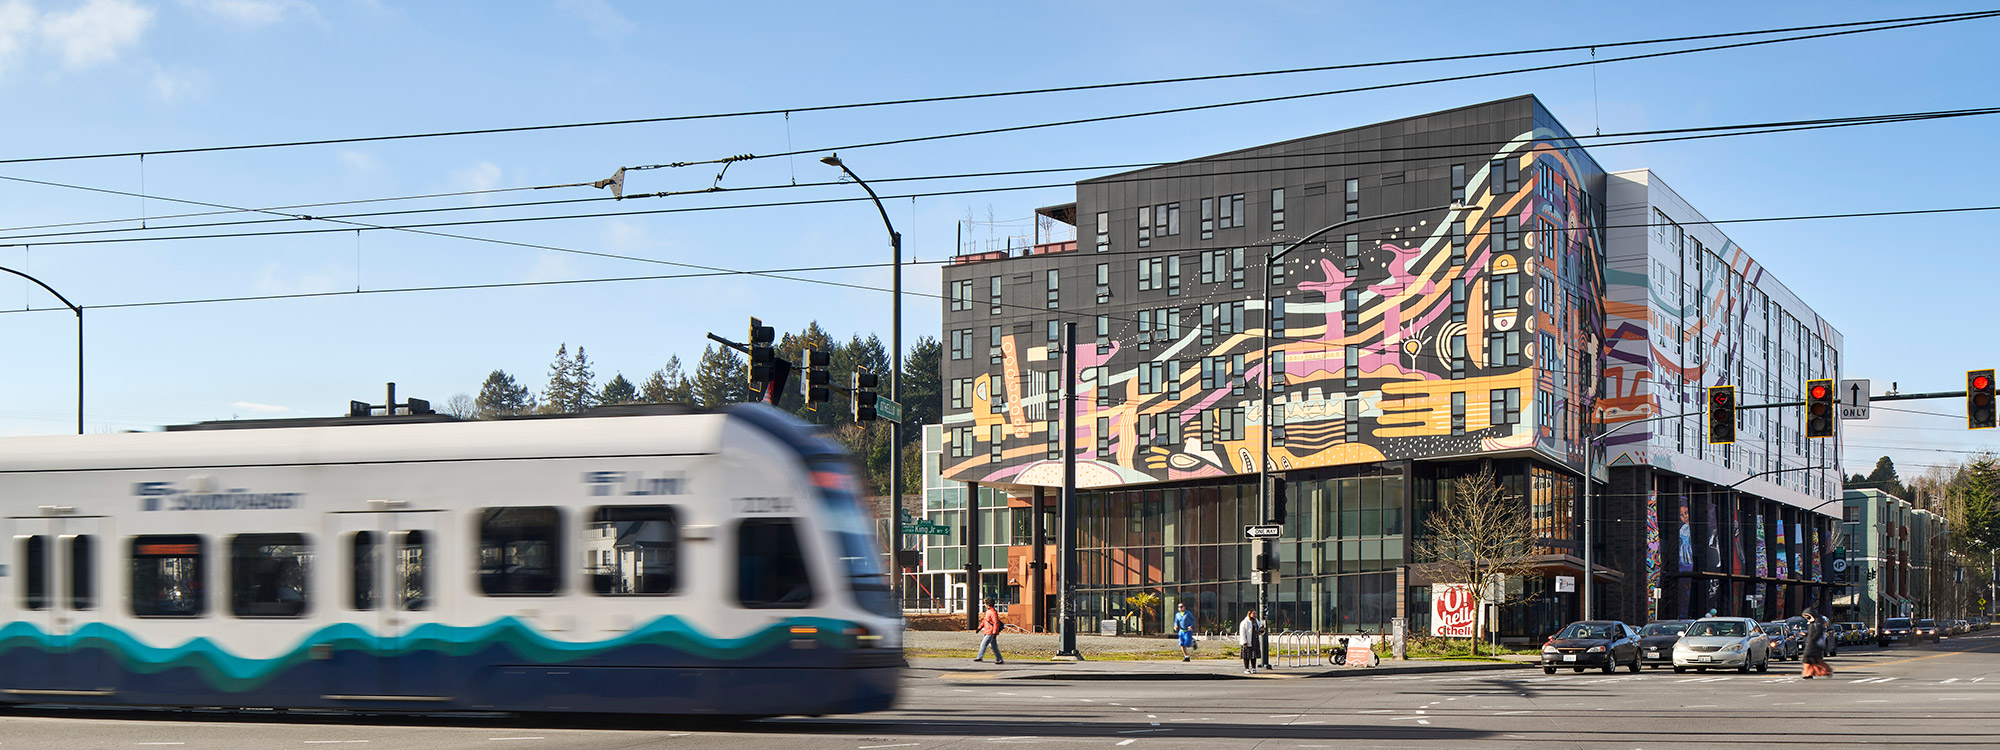 Orenda at Othello Square with the Light Rail train in the foreground